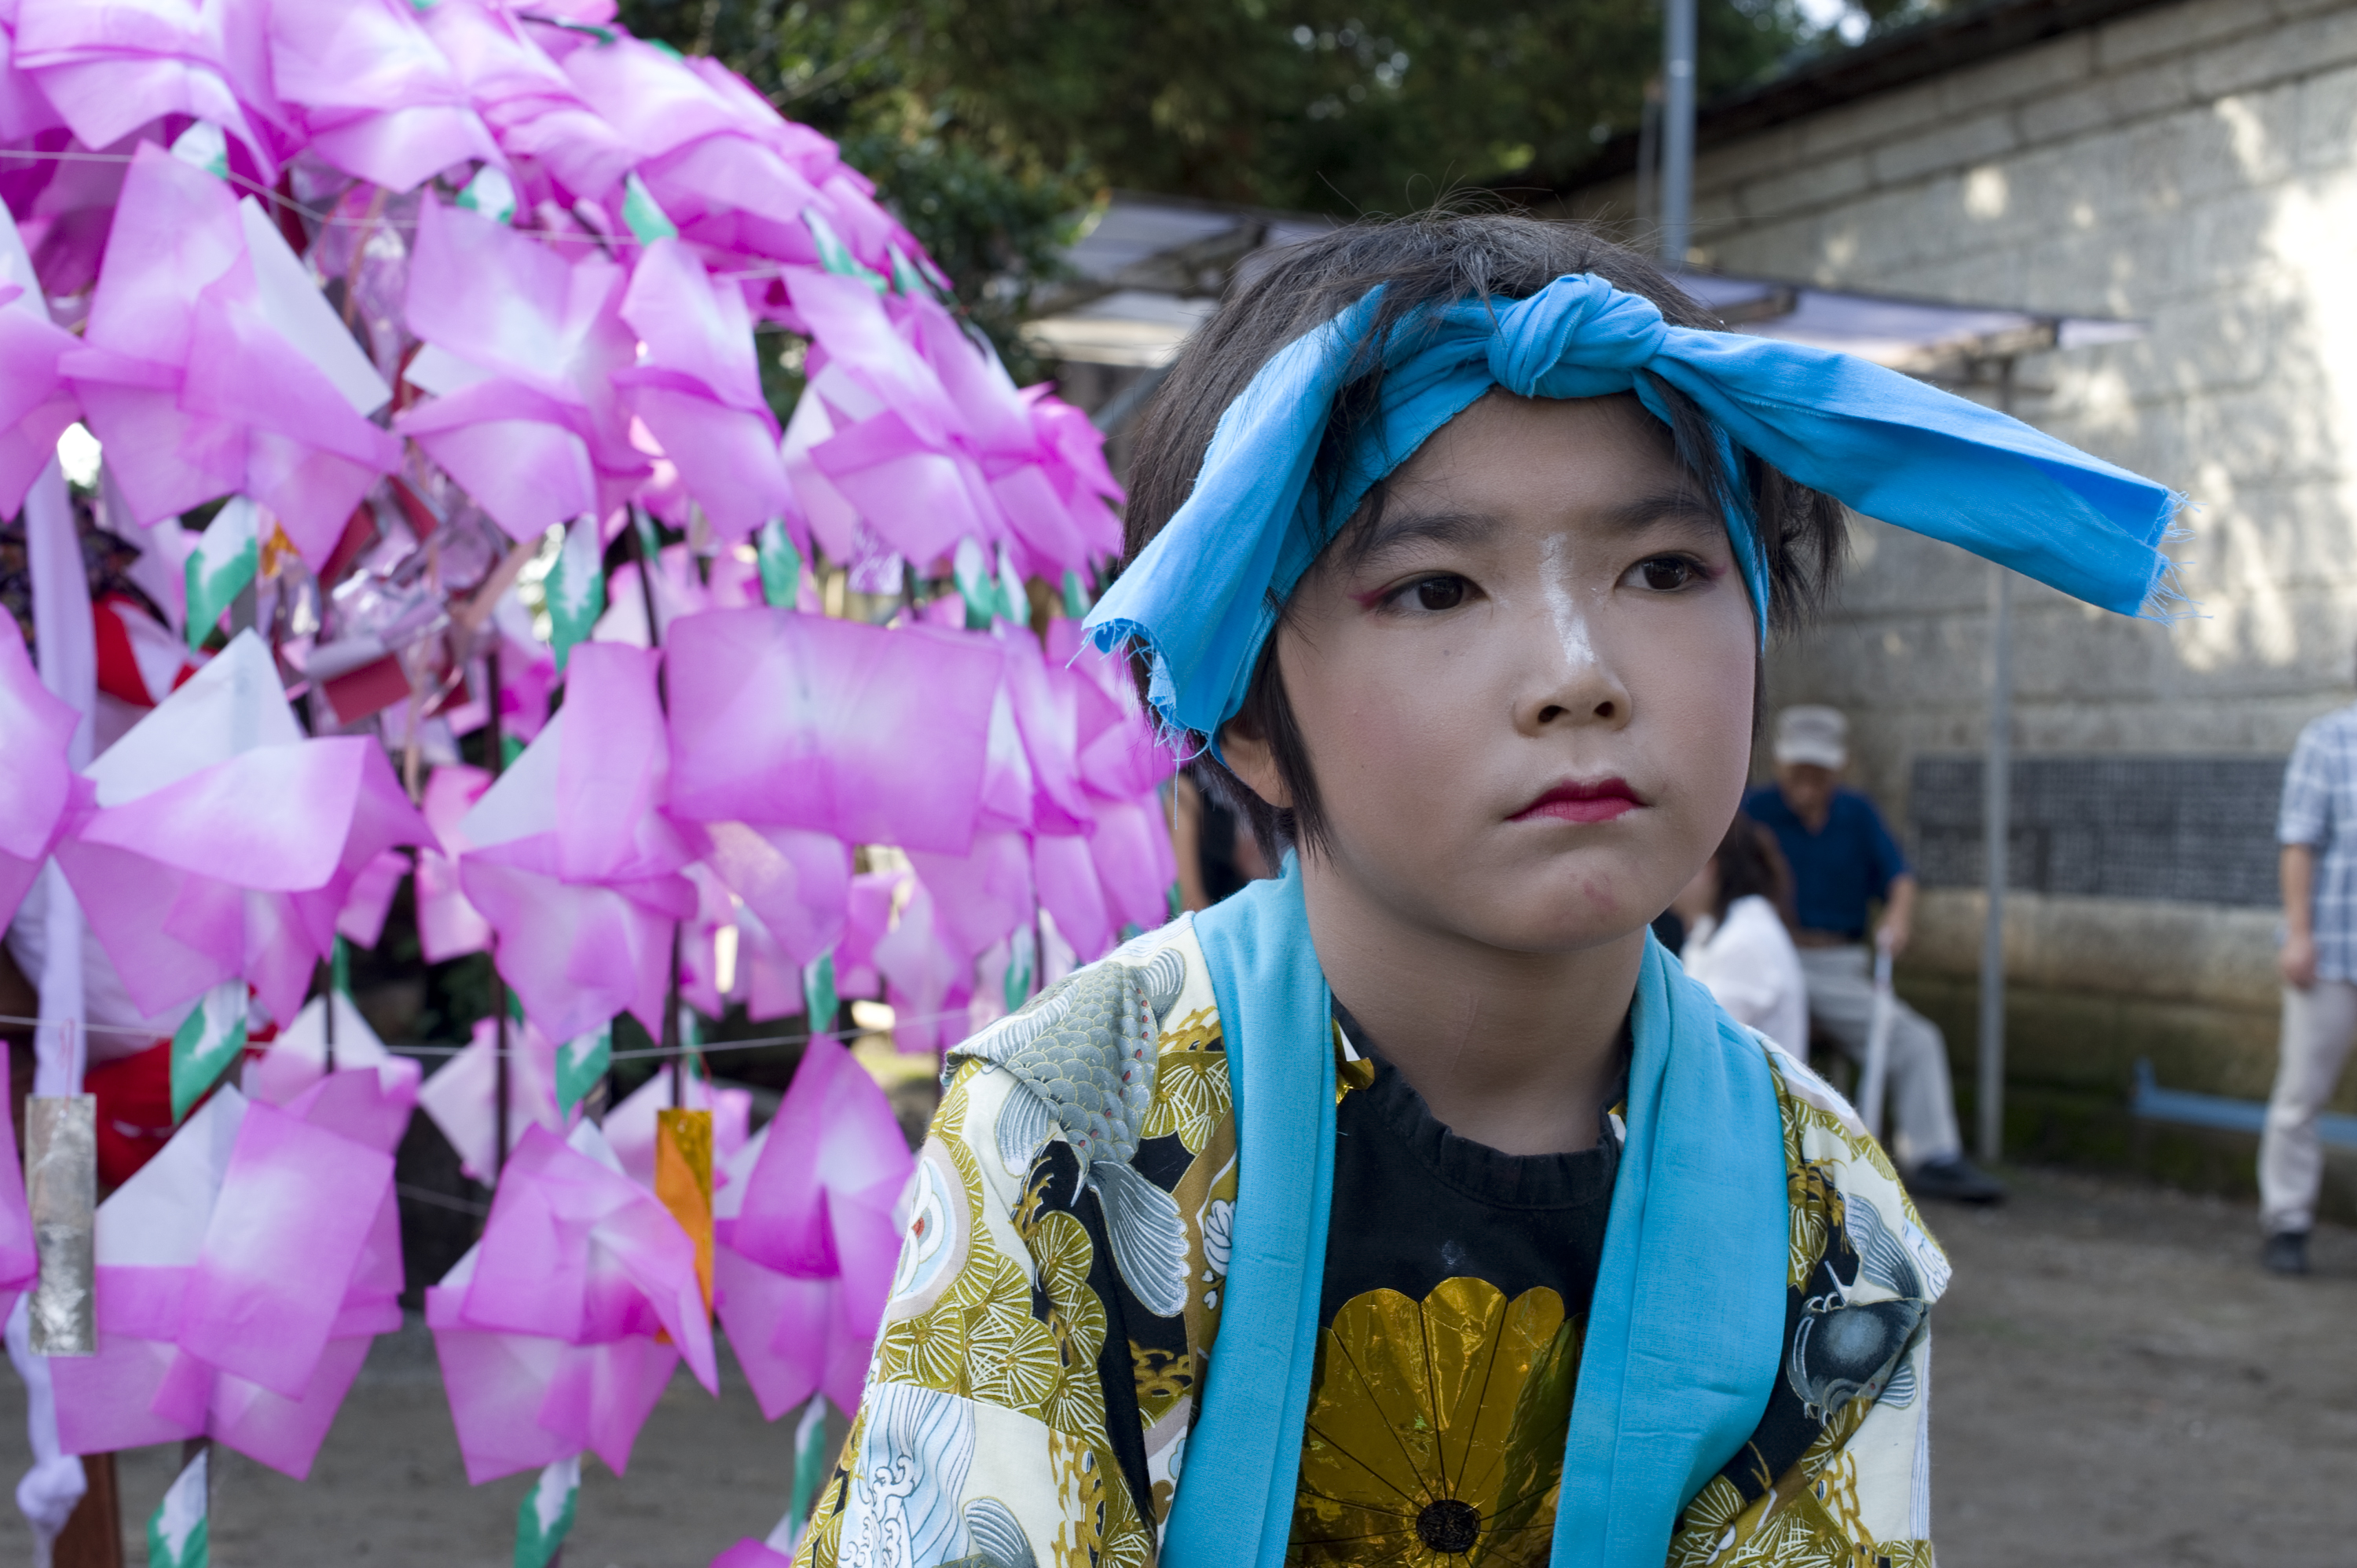 A youth reflects after dancing in the Horo Festival in Kawagoe, Saitama Pref.